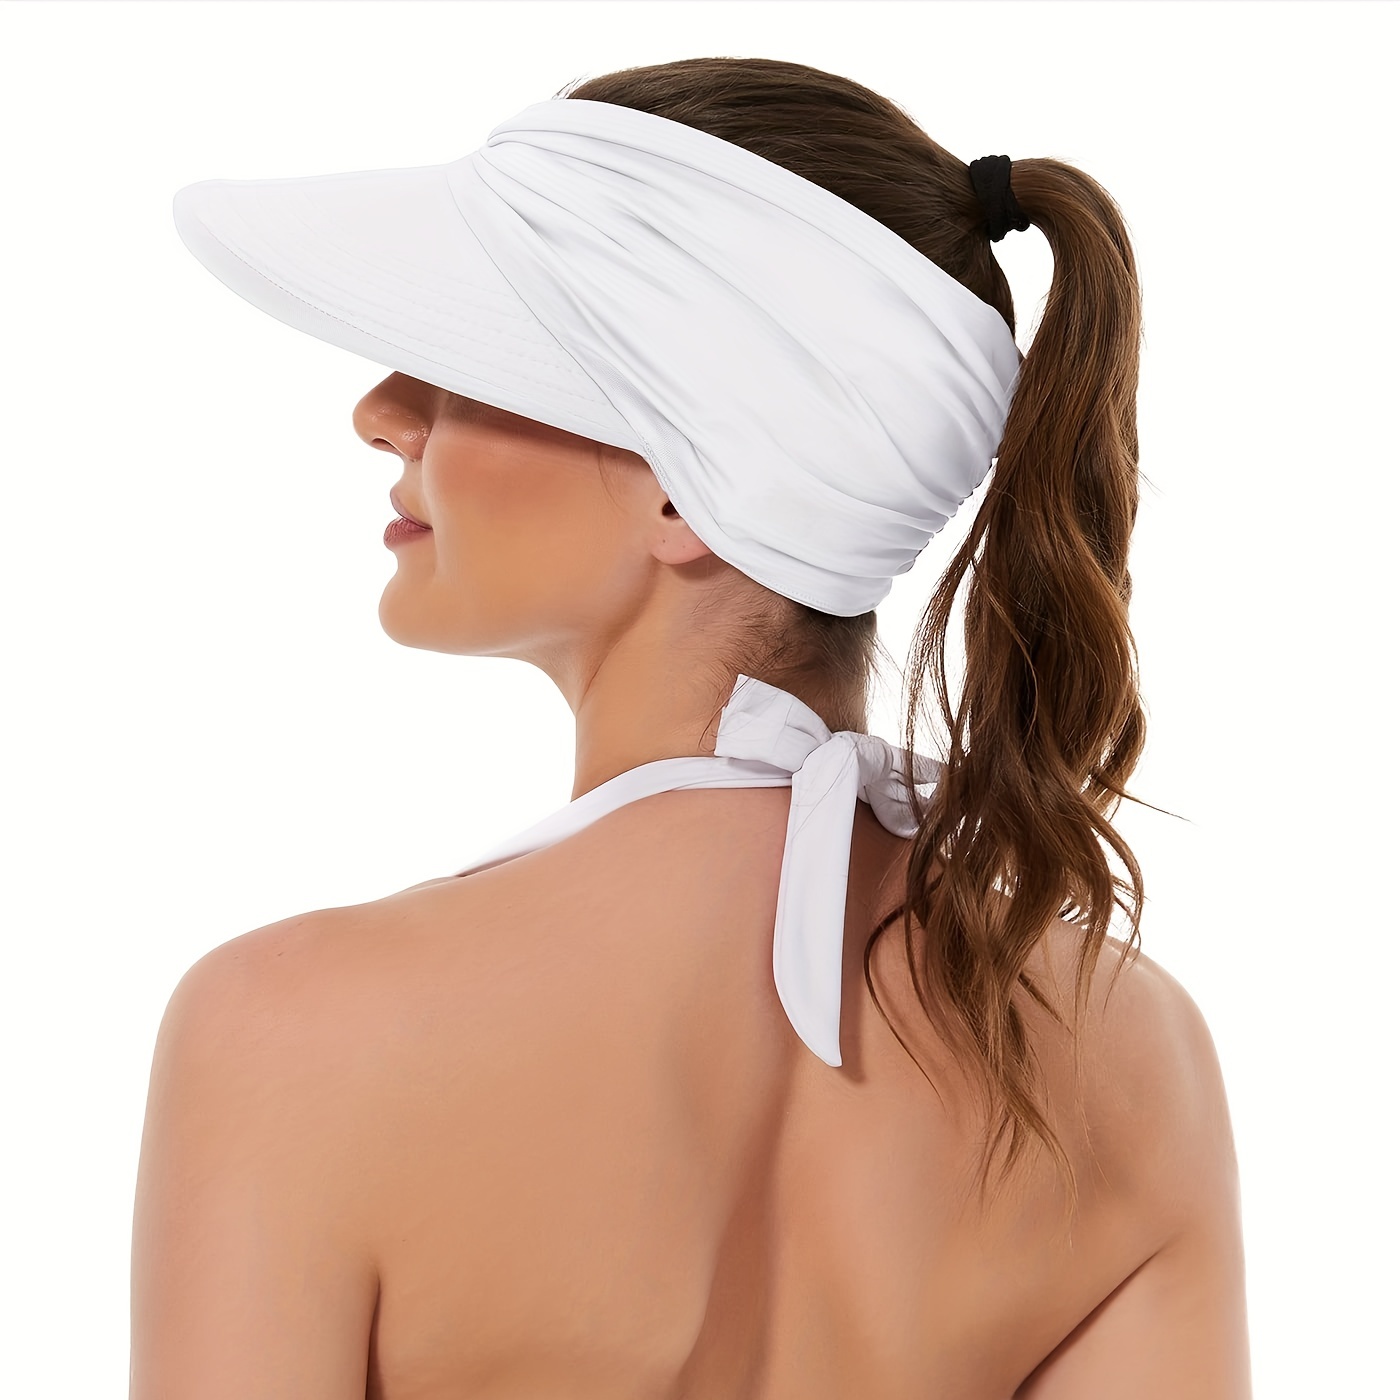 Foldable 2 In 1 Cap With Bandana With Wide Brim Headband Visors For Women  Ideal For Beach Fishing And Top Shell Hat With Hole From Longbeard, $10.23